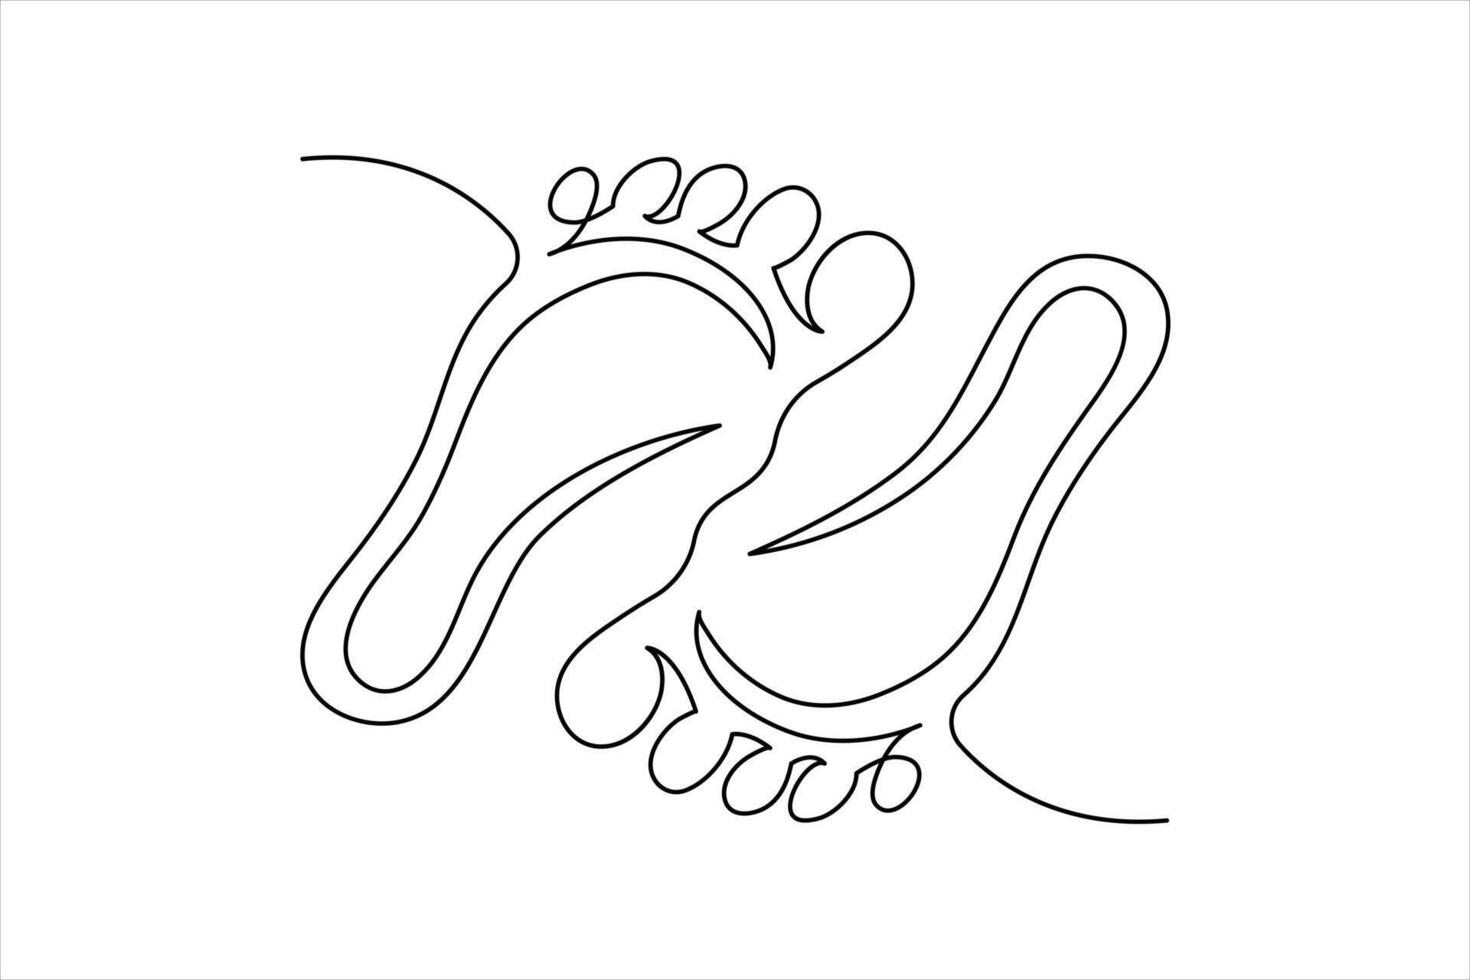 Continuous single line Baby foot one line style. Hand drawing. stock illustration vector